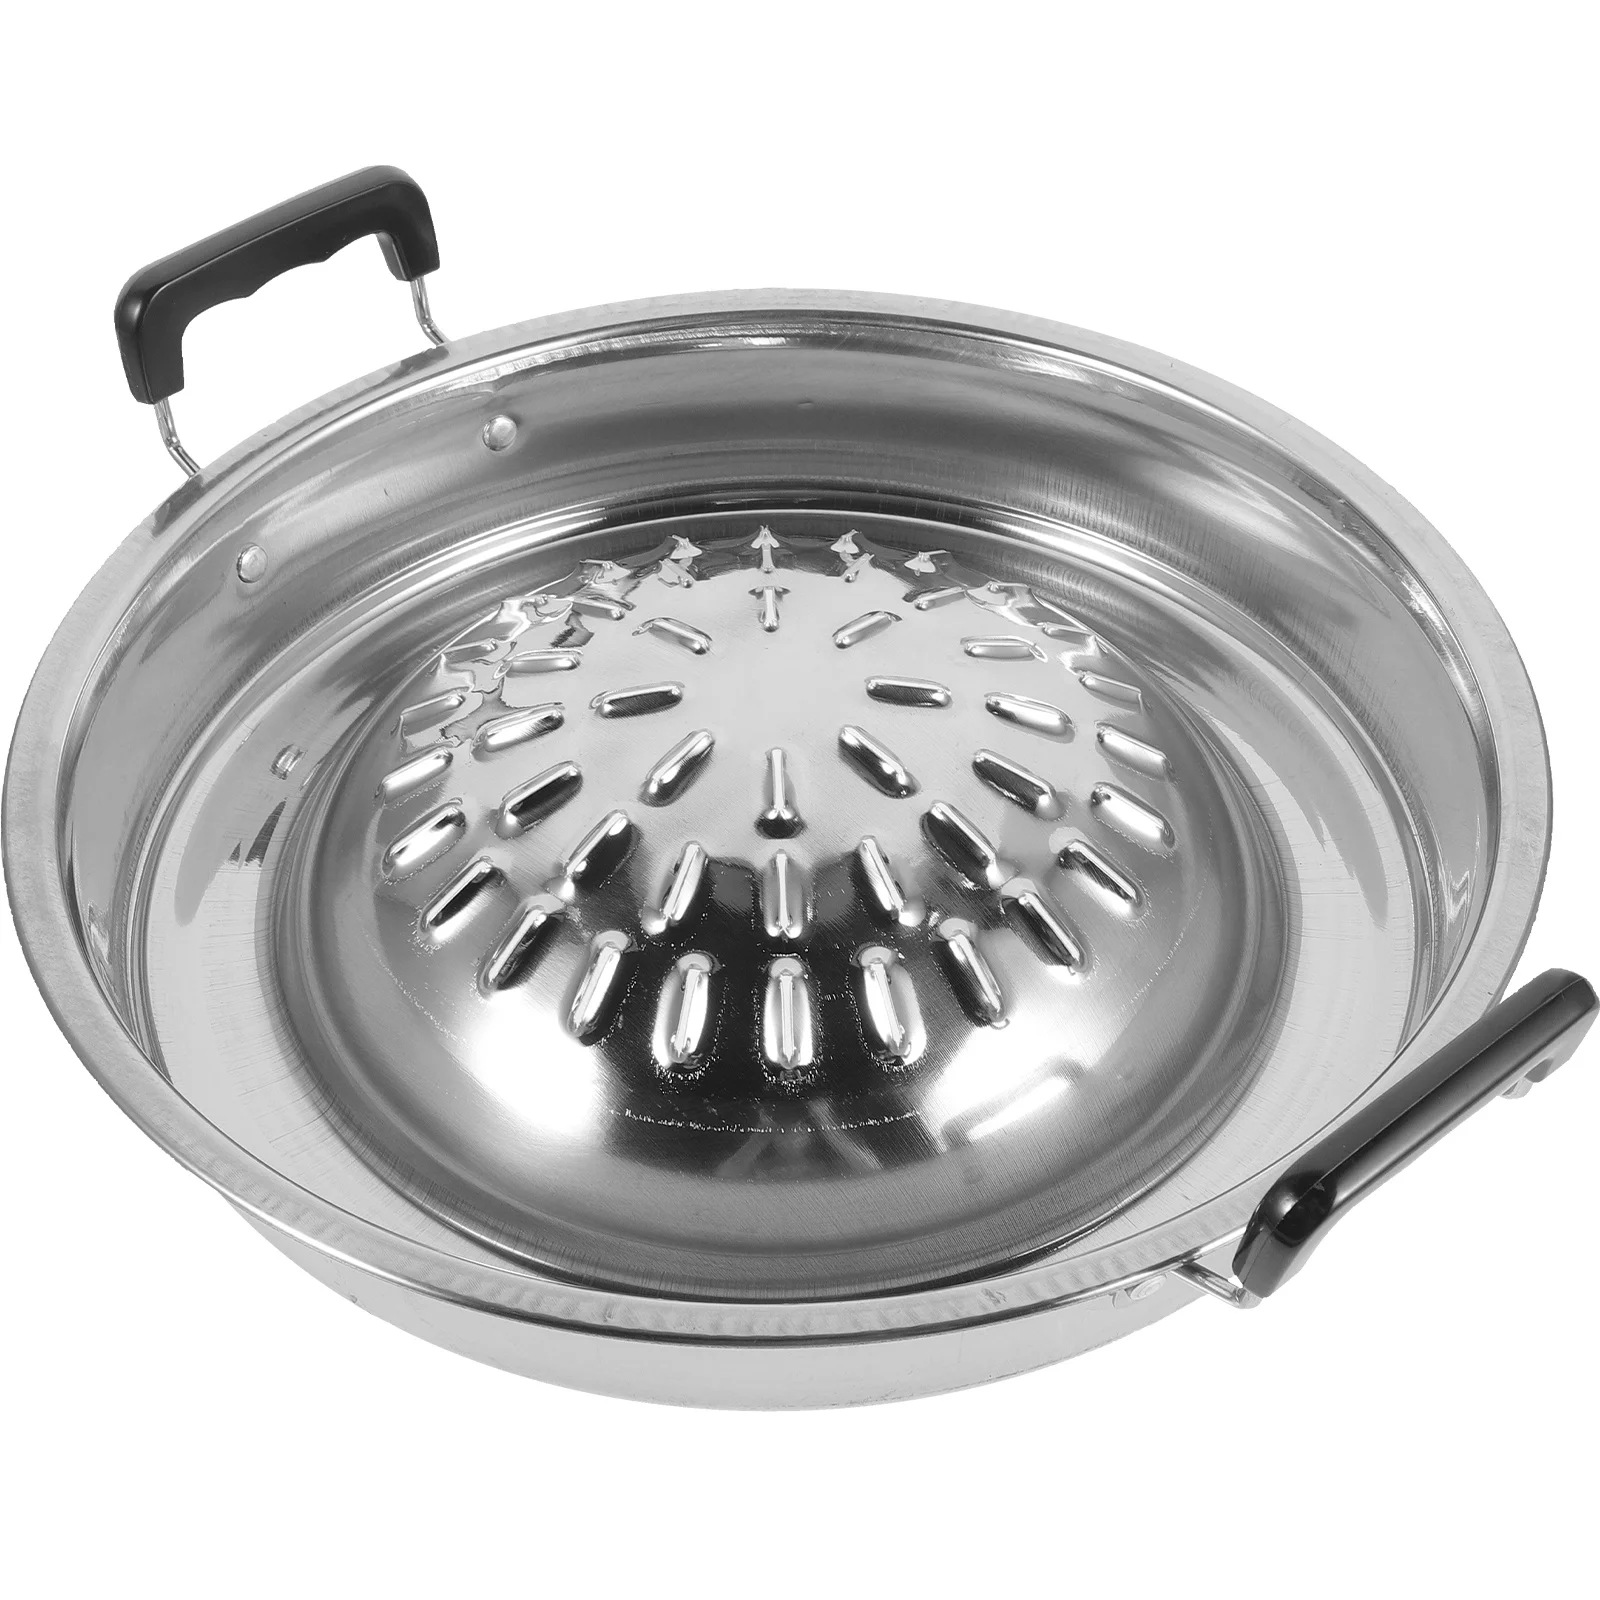 

BBQ Grill Pan Bbq Plate Stovetop Korean Bbq Non-Stick Round Barbecue Grill Pan Stainless Steel Meat Grilling Pan Round